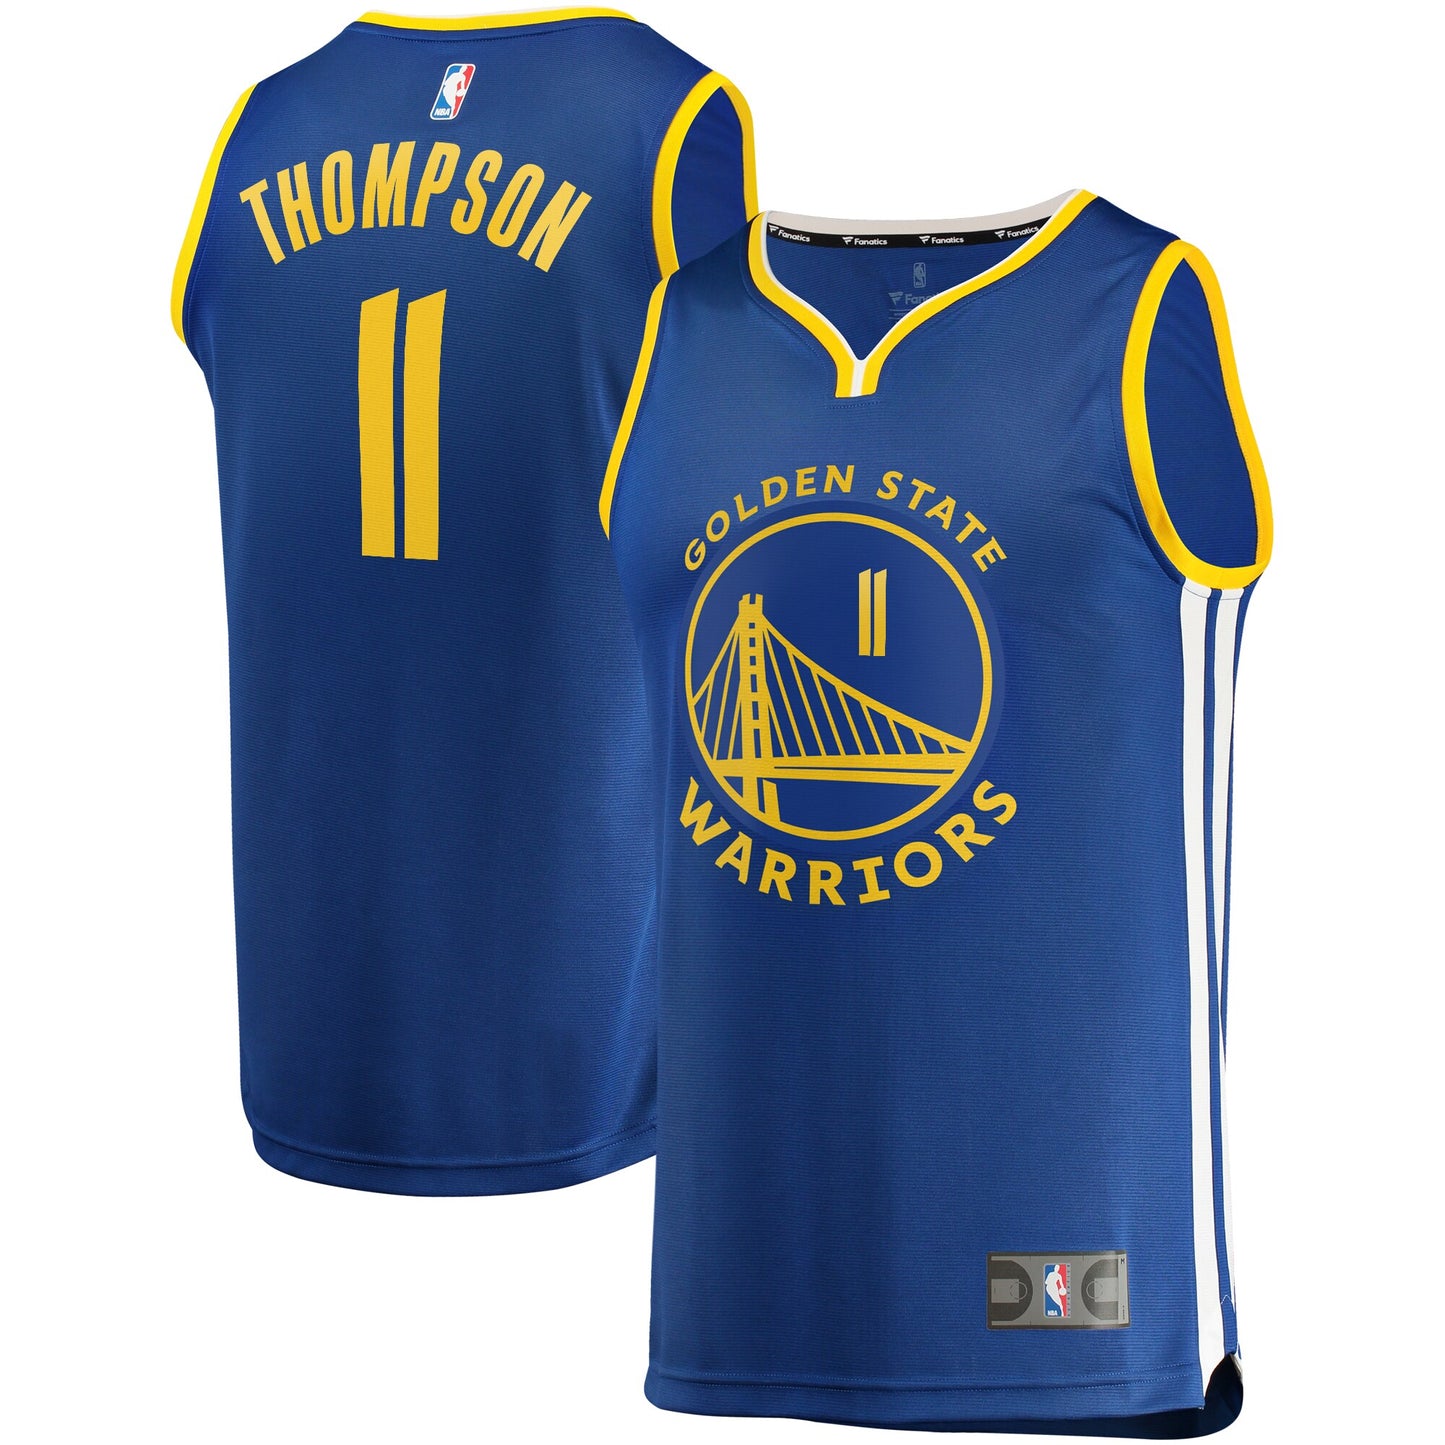 Klay Thompson Golden State Warriors Fanatics Branded Youth Fast Break Player Replica Jersey - Icon Edition - Royal